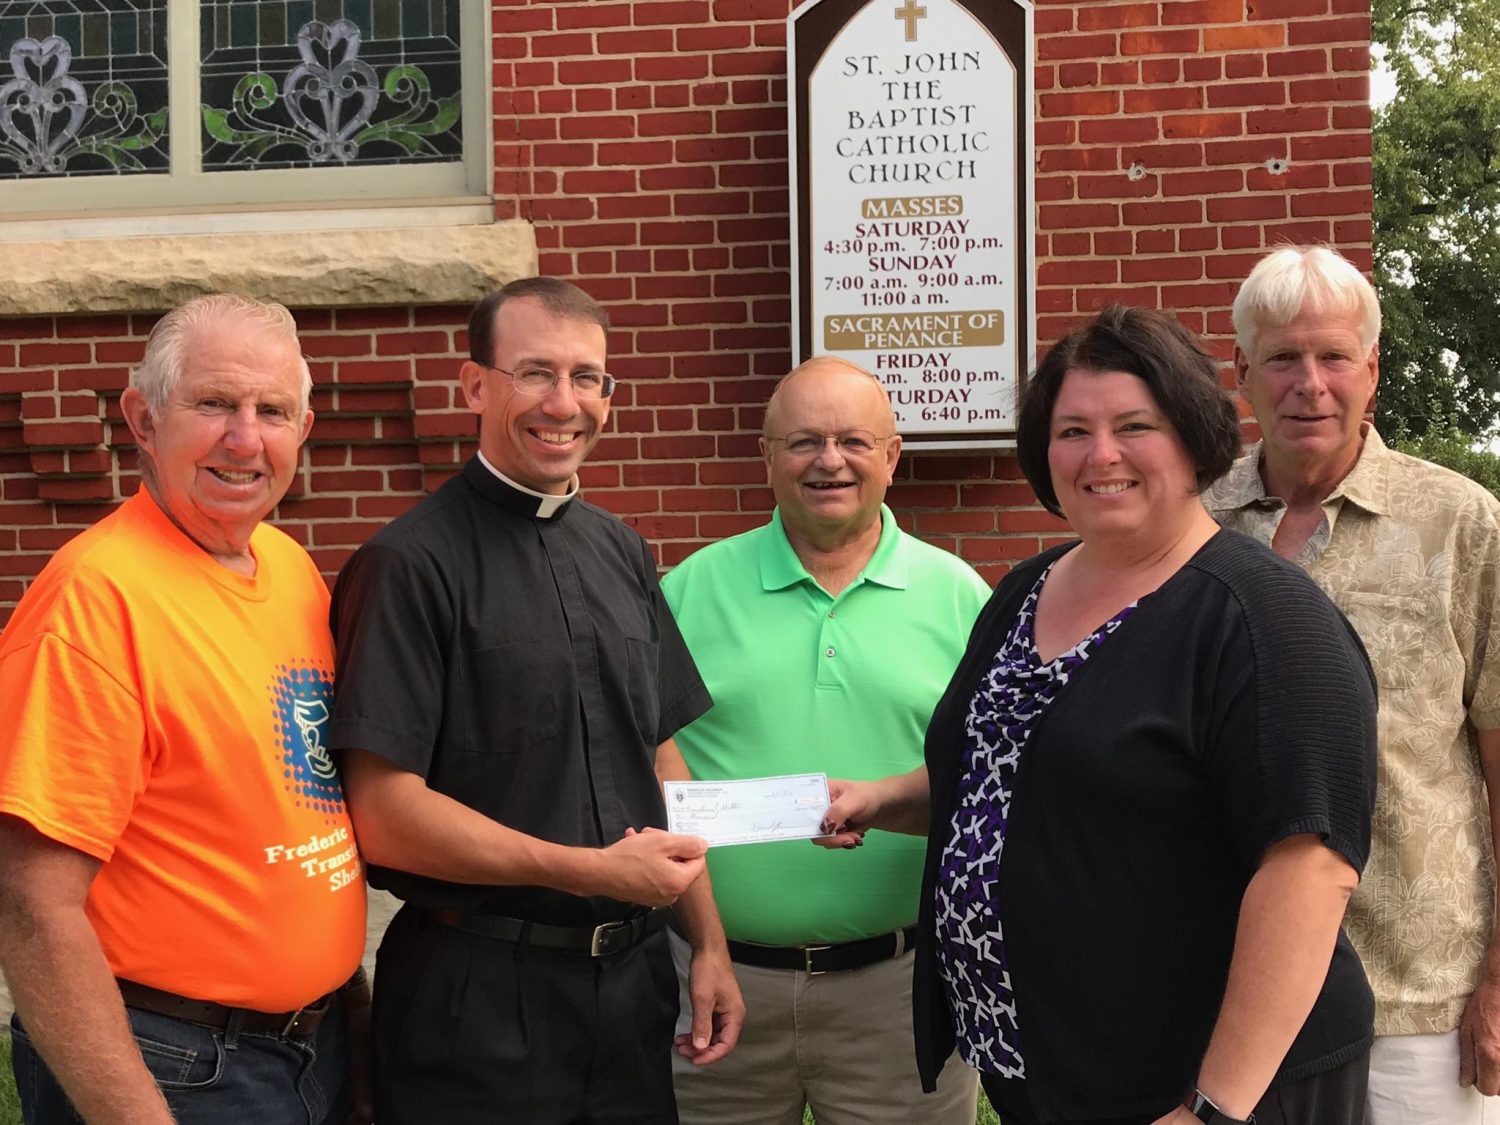 The Rev. Samuel Martin (second from left), pastor of St. John the Baptist Catholic Church in Marshfield, presents a check to Tammy Schueller, Frederic Ozanam Family Shelter director. In the back row from left are Jerry Lang, St. Vincent de Paul Thrift Store/Outreach Center board of directors president; Tom Youngwith, president of St. Johns Conference of the Society of St. Vincent de Paul; and Paul Lang, Frederic Ozanam Family Shelter board of directors president.